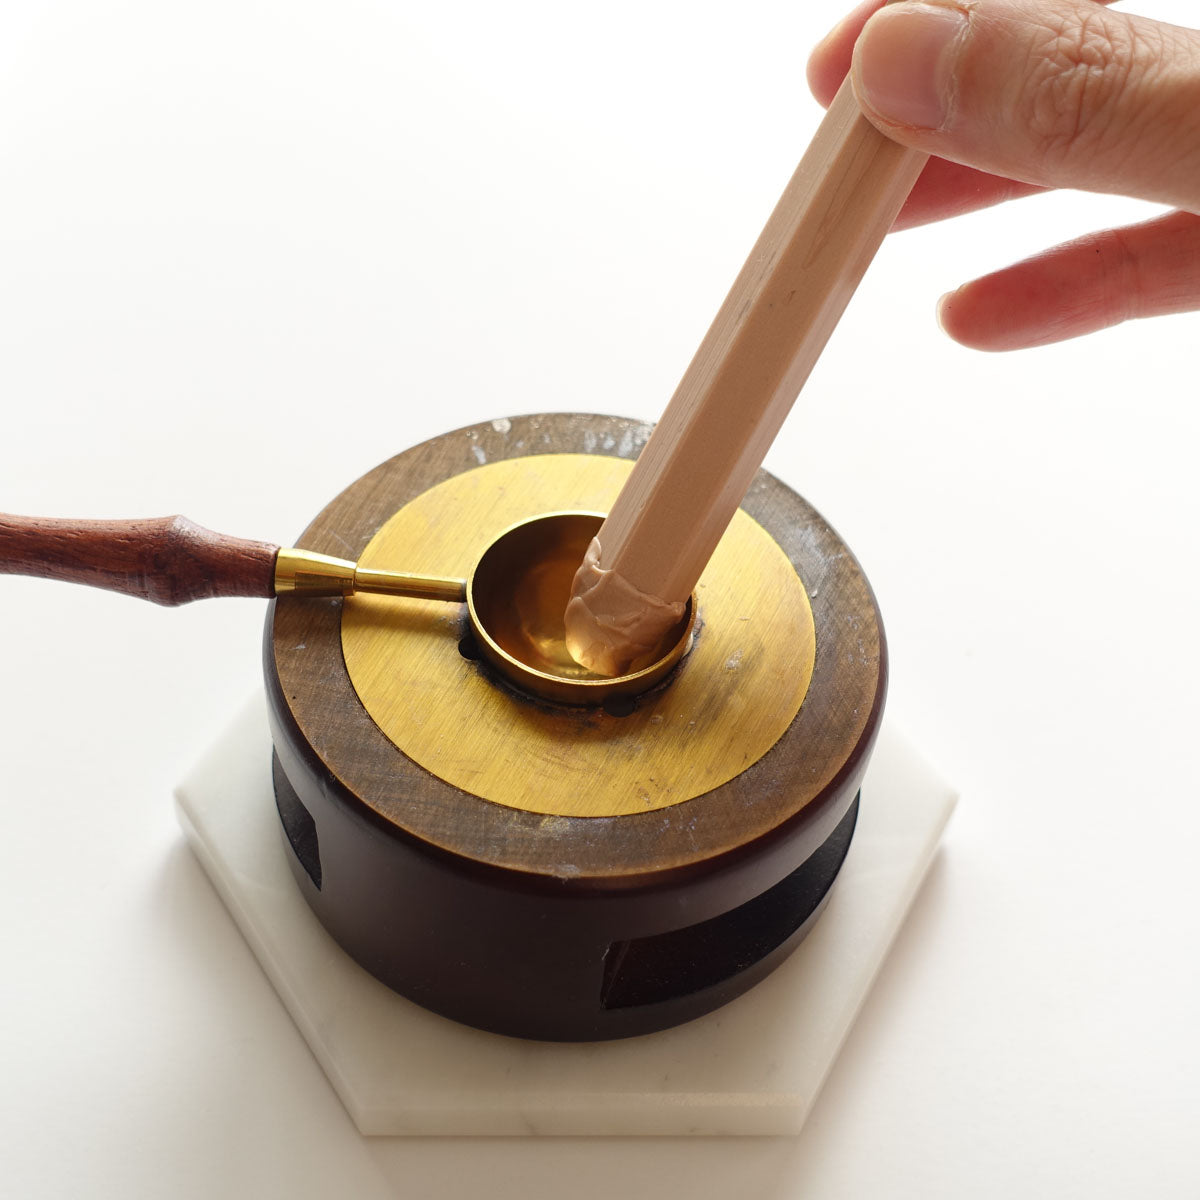 How to melt wickless wax seal stick